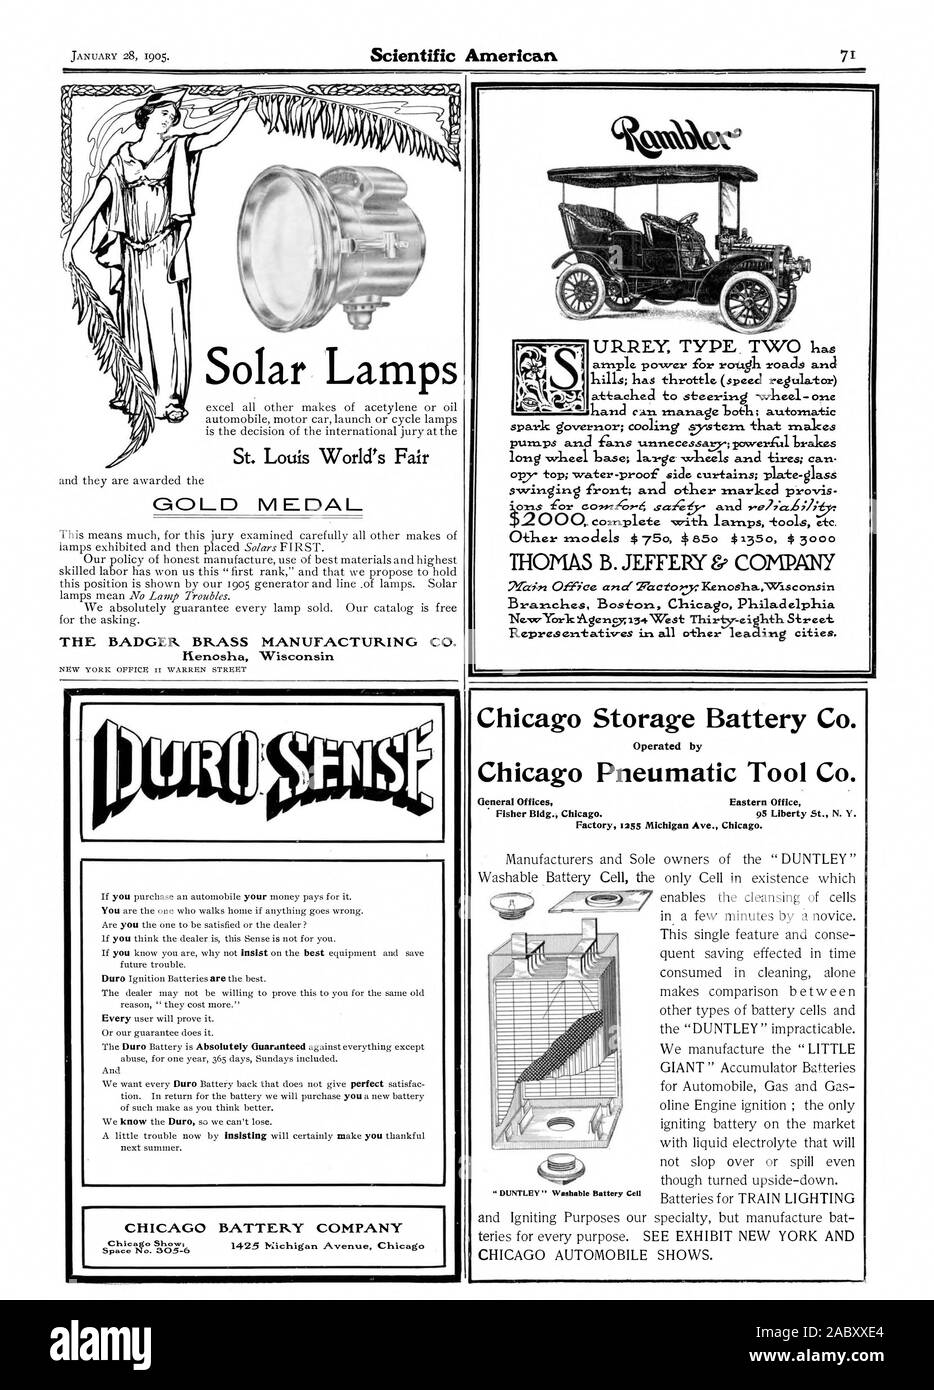 Scientific American THE BADGER BRASS MANUFACTURING CO. Kenosha Wisconsin Solar Lamps CHICAGO BATTERY COMPANY Chicago Show; Space No. 305-6 1425 Michigan Avenue Chicag URREY TYPE. TWO has THOMAS B. JEFFERY COMPANY Bra.n.ches Boston Chicag Philadelphia Chicago Storage Battery Co. Operated by Chicago Pneumatic Tool Co. General Offices Eastern Office Fisher Bldg. Chicago. 95 Liberty St. N. Y. Factory 1255 Michigan Ave. Chicago. CHICAGO AUTOMOBILE SHOWS. 41., 1905-01-28 Stock Photo